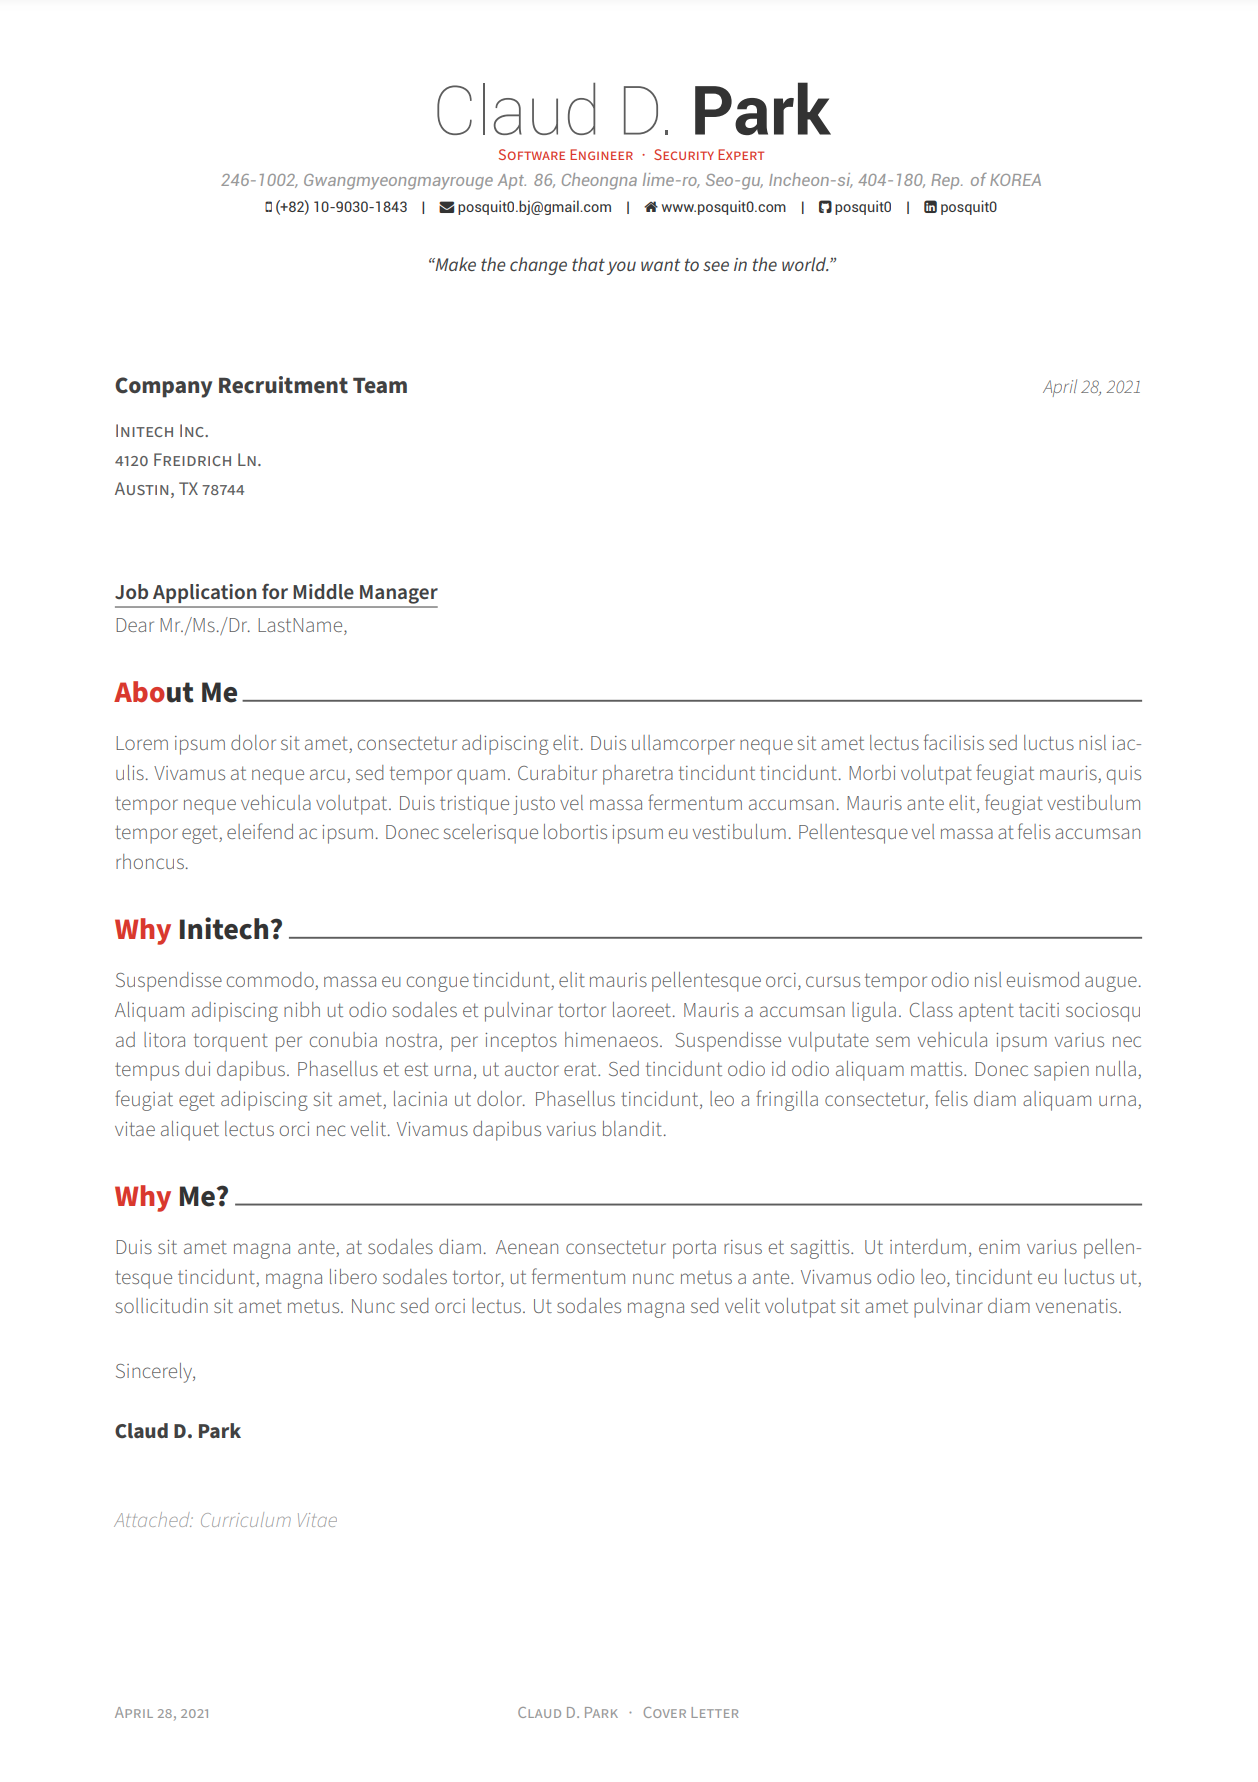 Awesome Resume/CV and Cover Letter